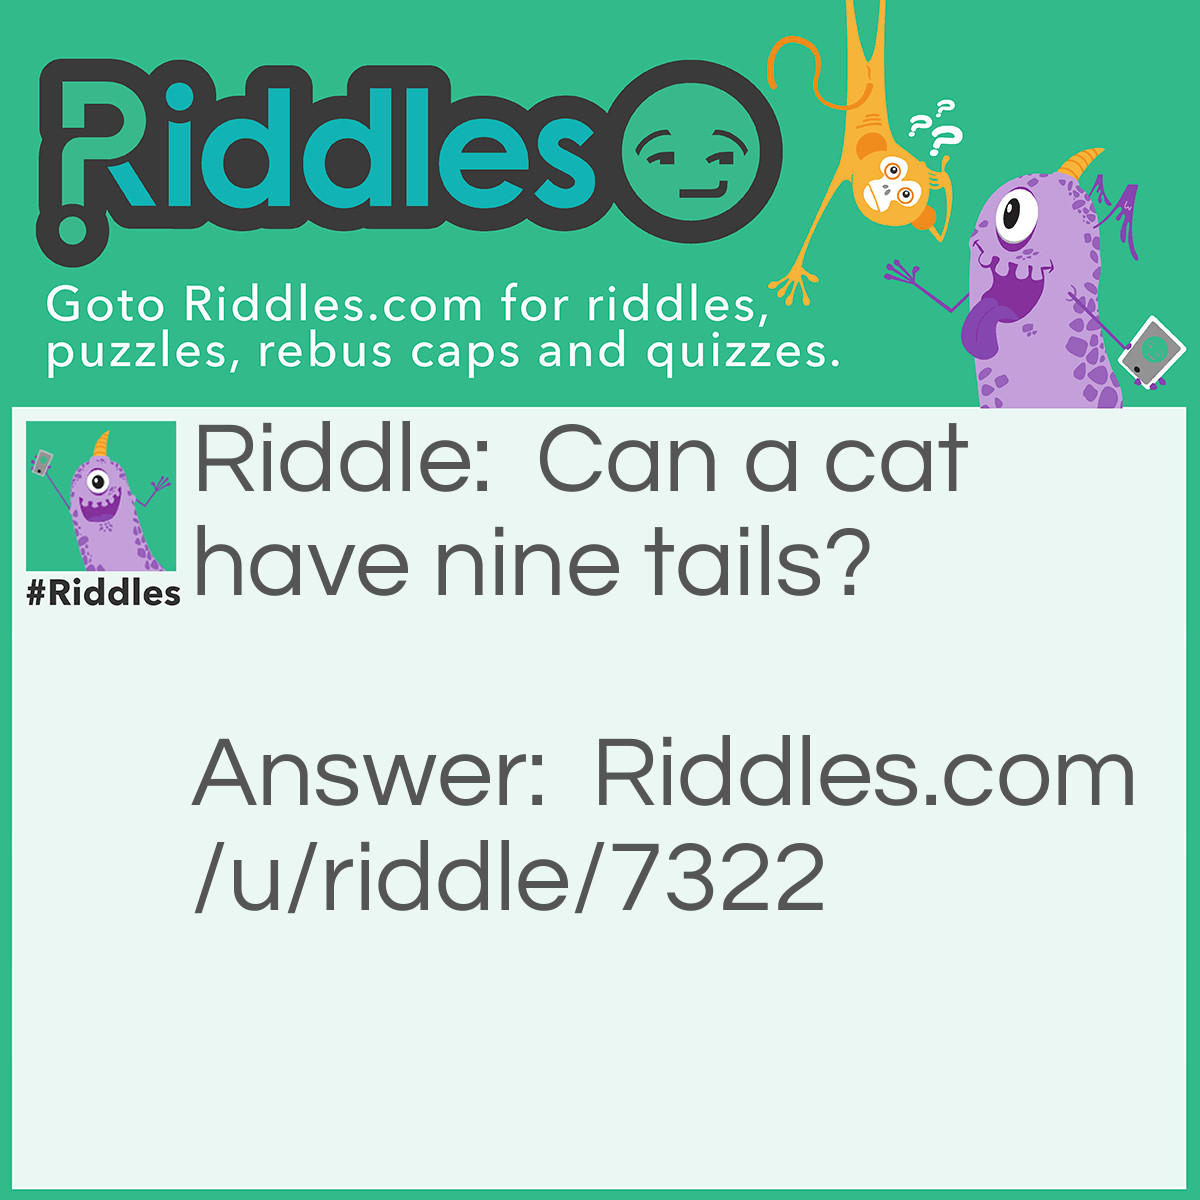 Riddle: Can a cat have nine tails? Answer: Yes - every cat can have nine tails: Every cat has one tail more than no cat. No cat has eight tails, therefore every cat has nine tails! (Unless it is a Manx cat, which doesn’t have a tail)